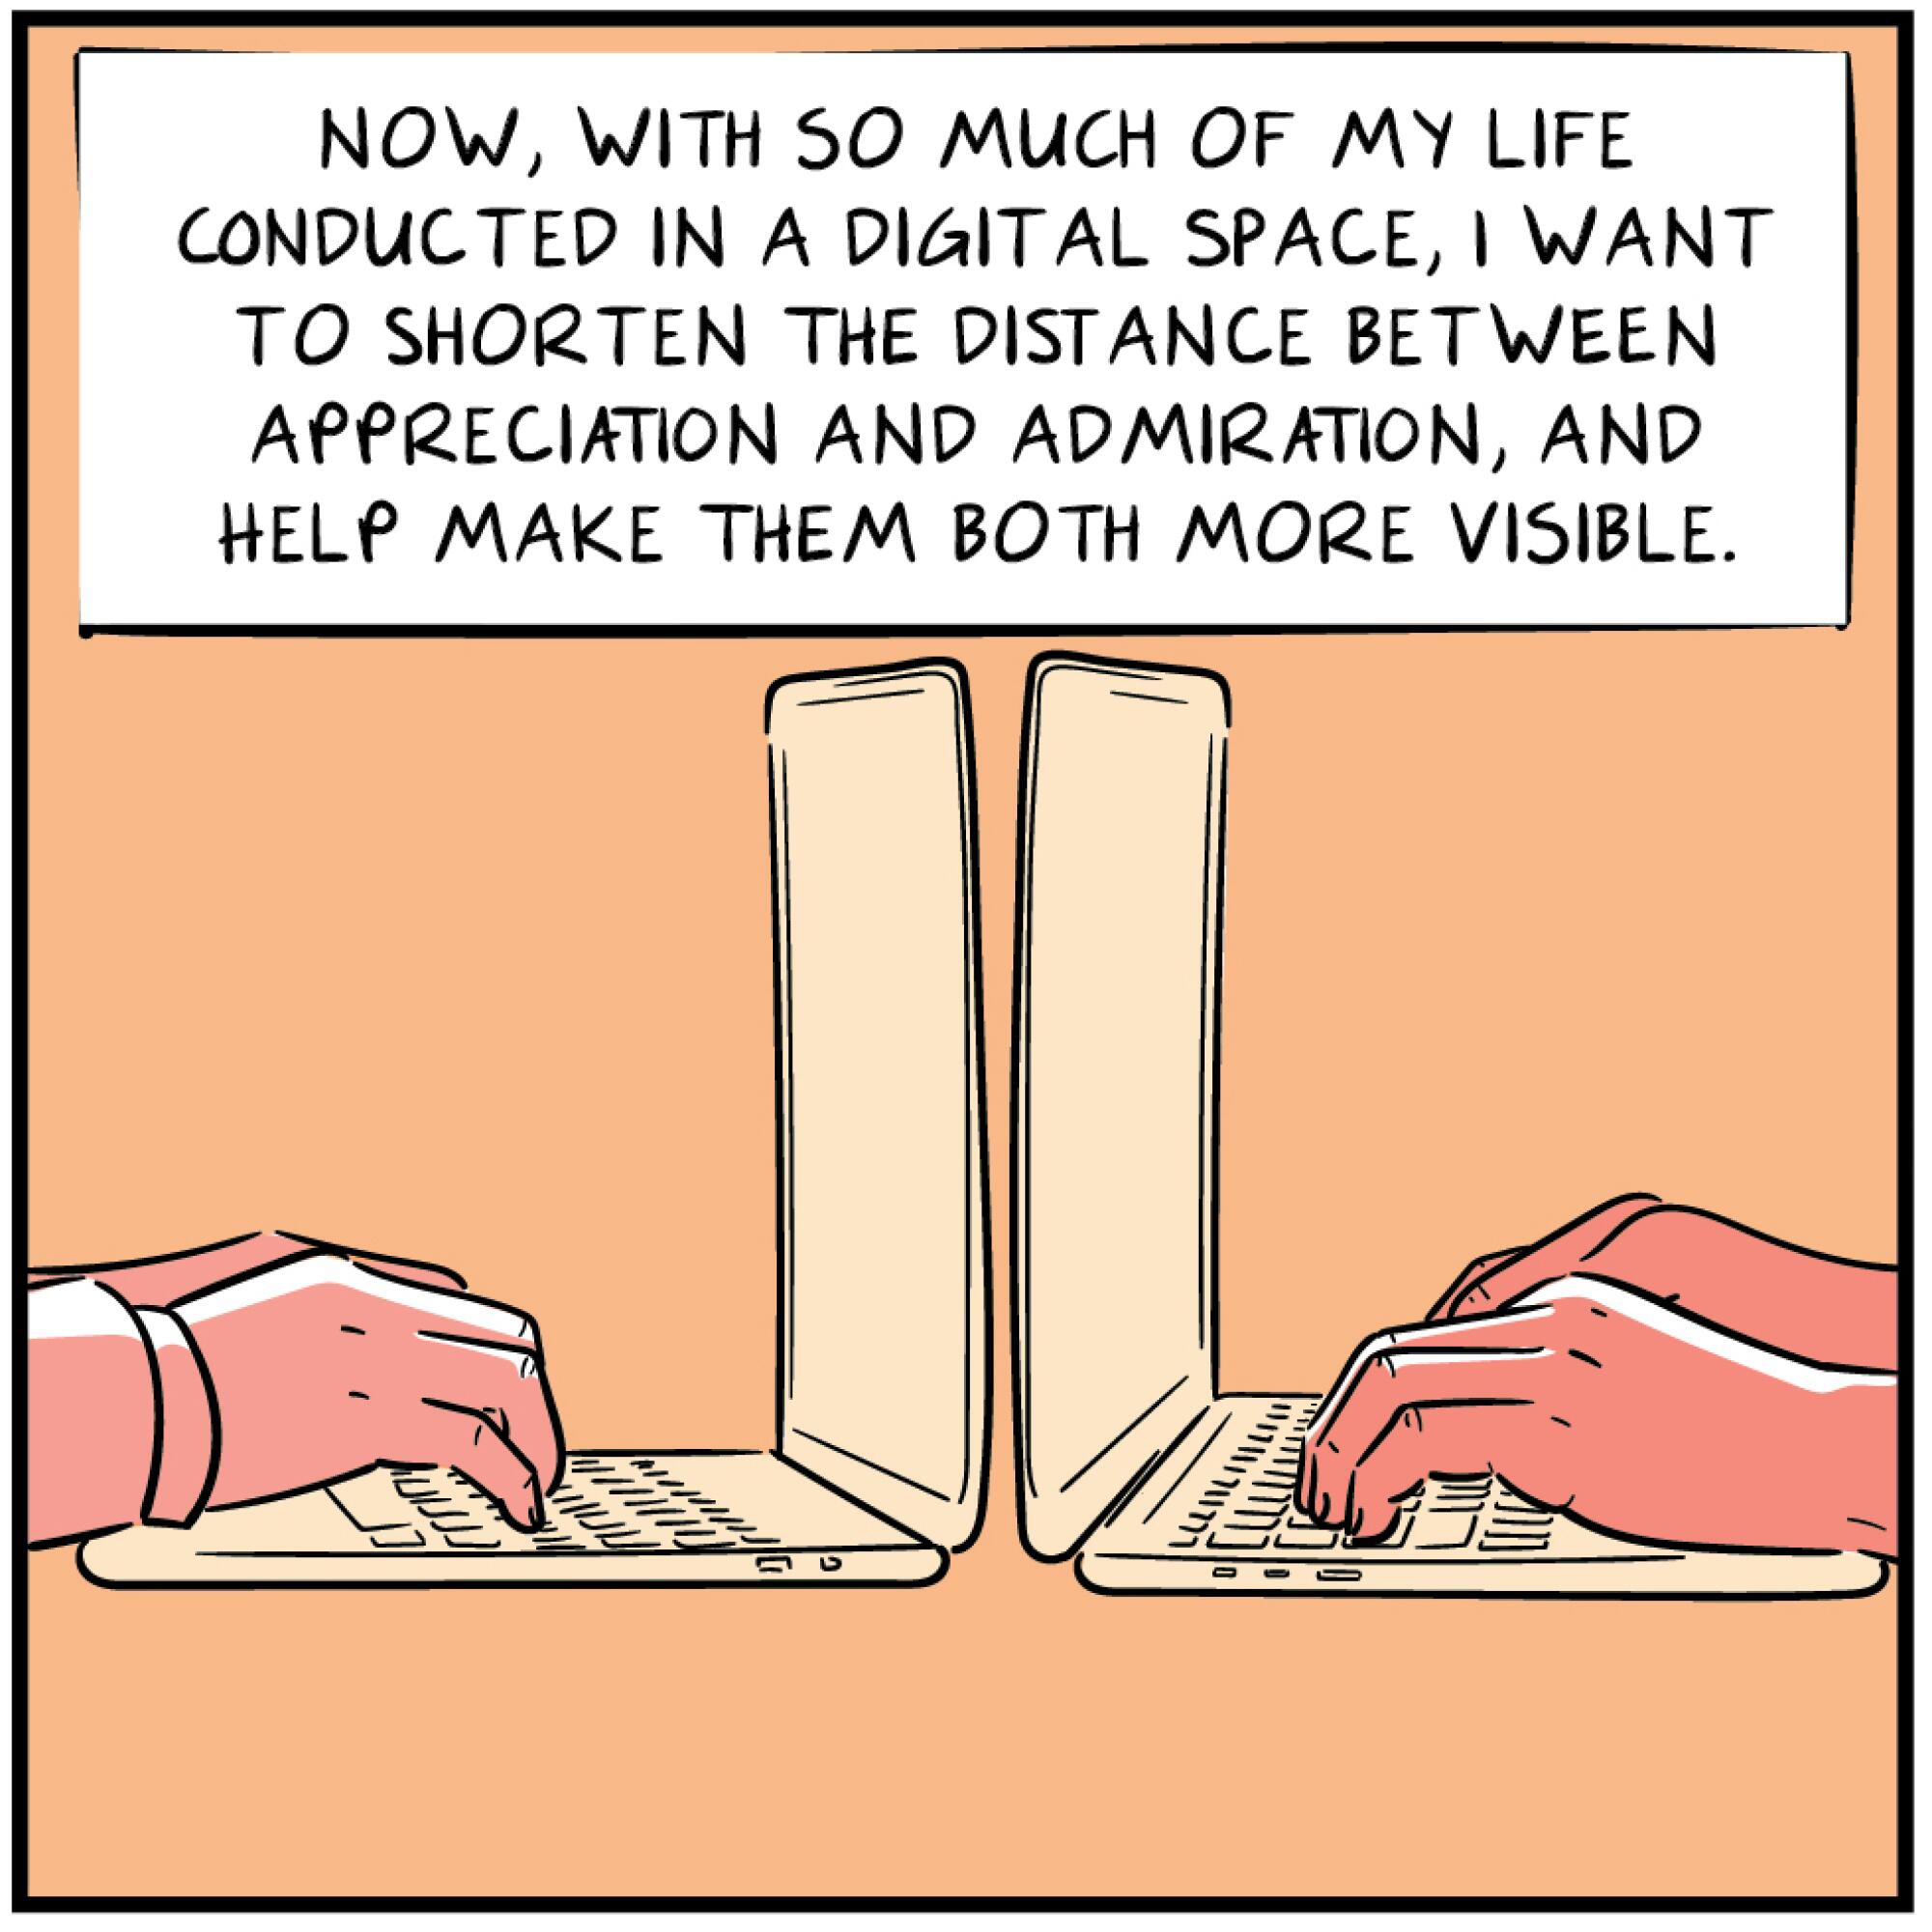 Comic panel showing two laptop facing each other with hands typing on each keyboard